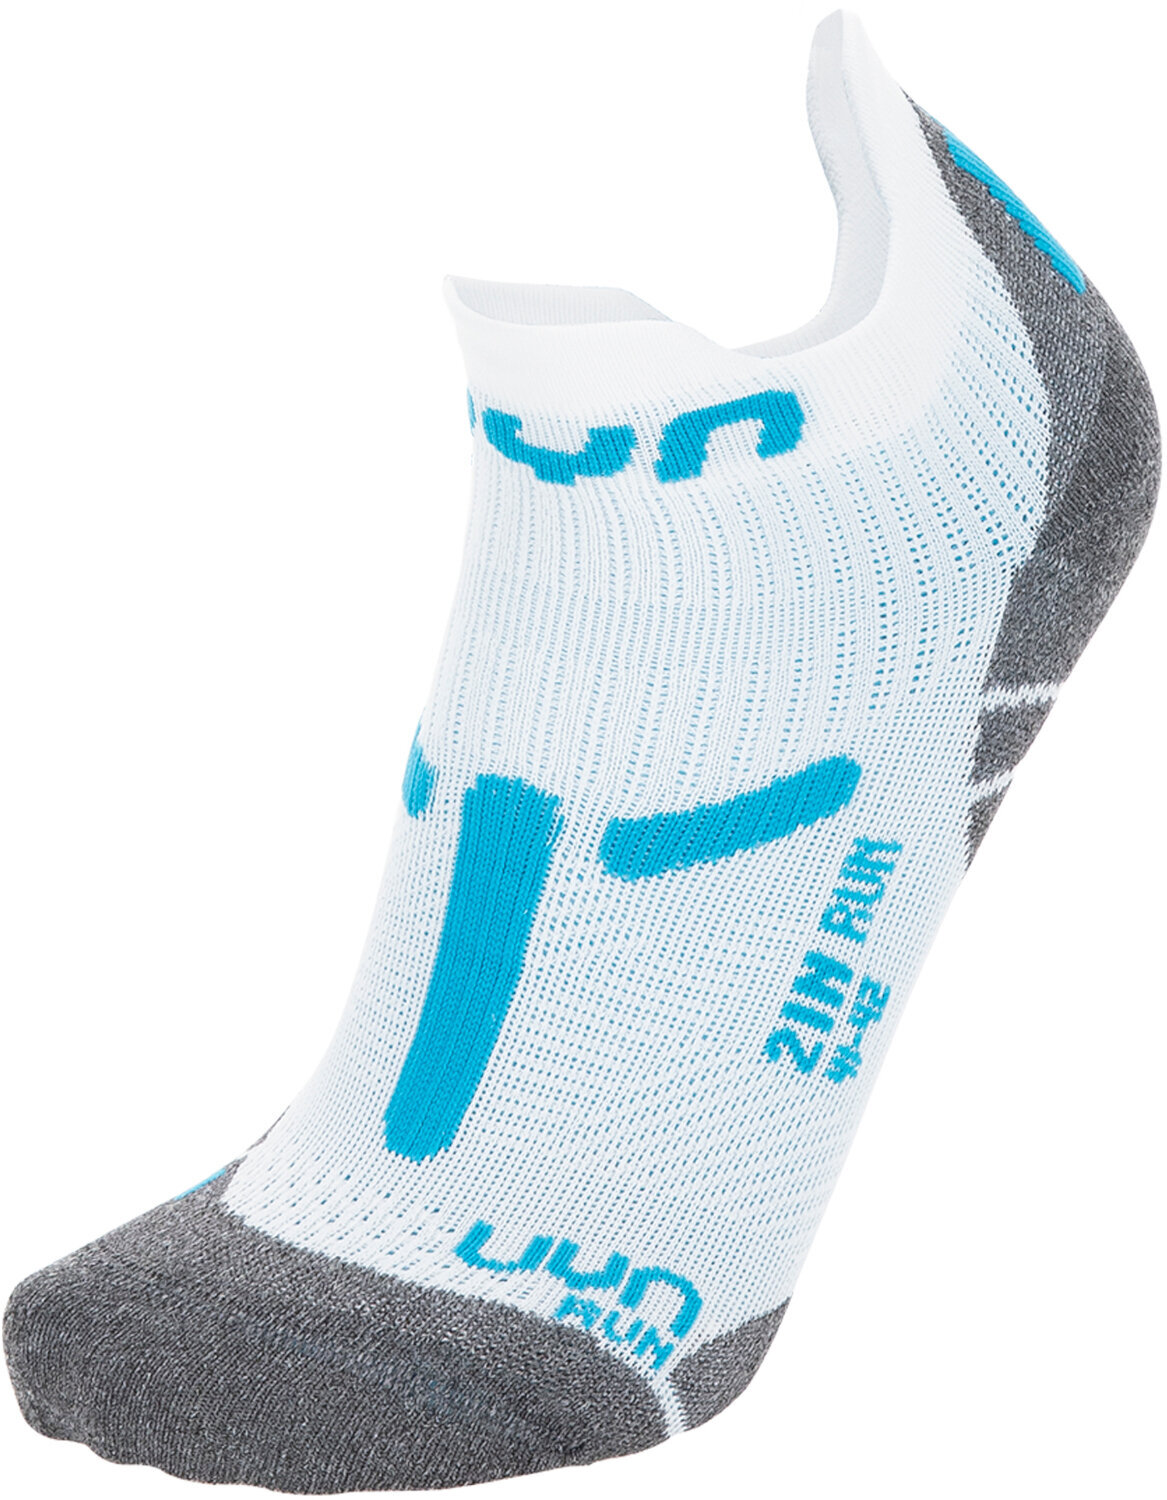 Calcetines para correr UYN Run 2in Turquoise-White 37/38 Calcetines para correr